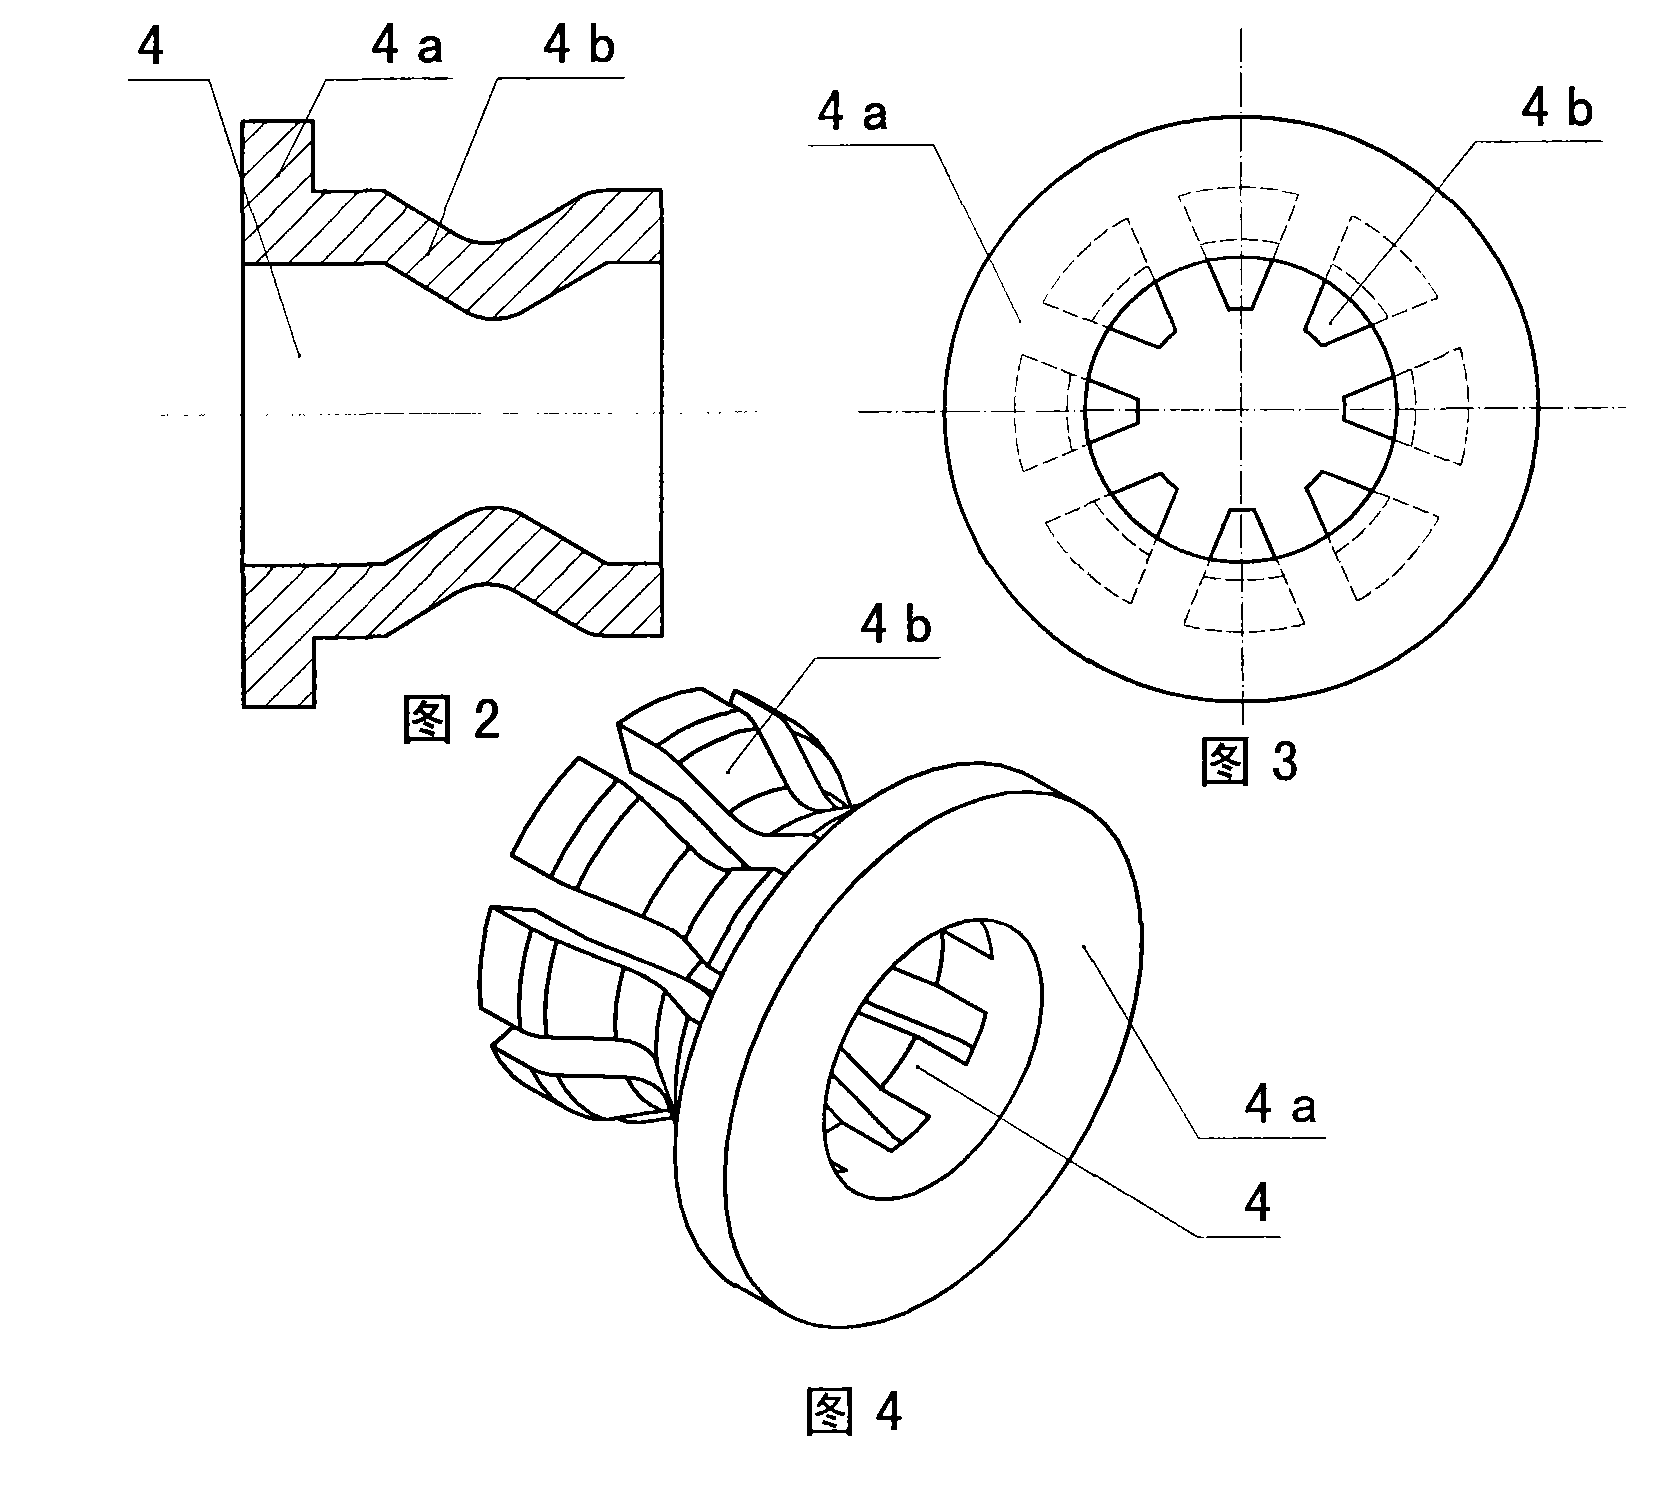 Connecting structure for vehicular generator for eliminating coupling of mechanical vibration noise